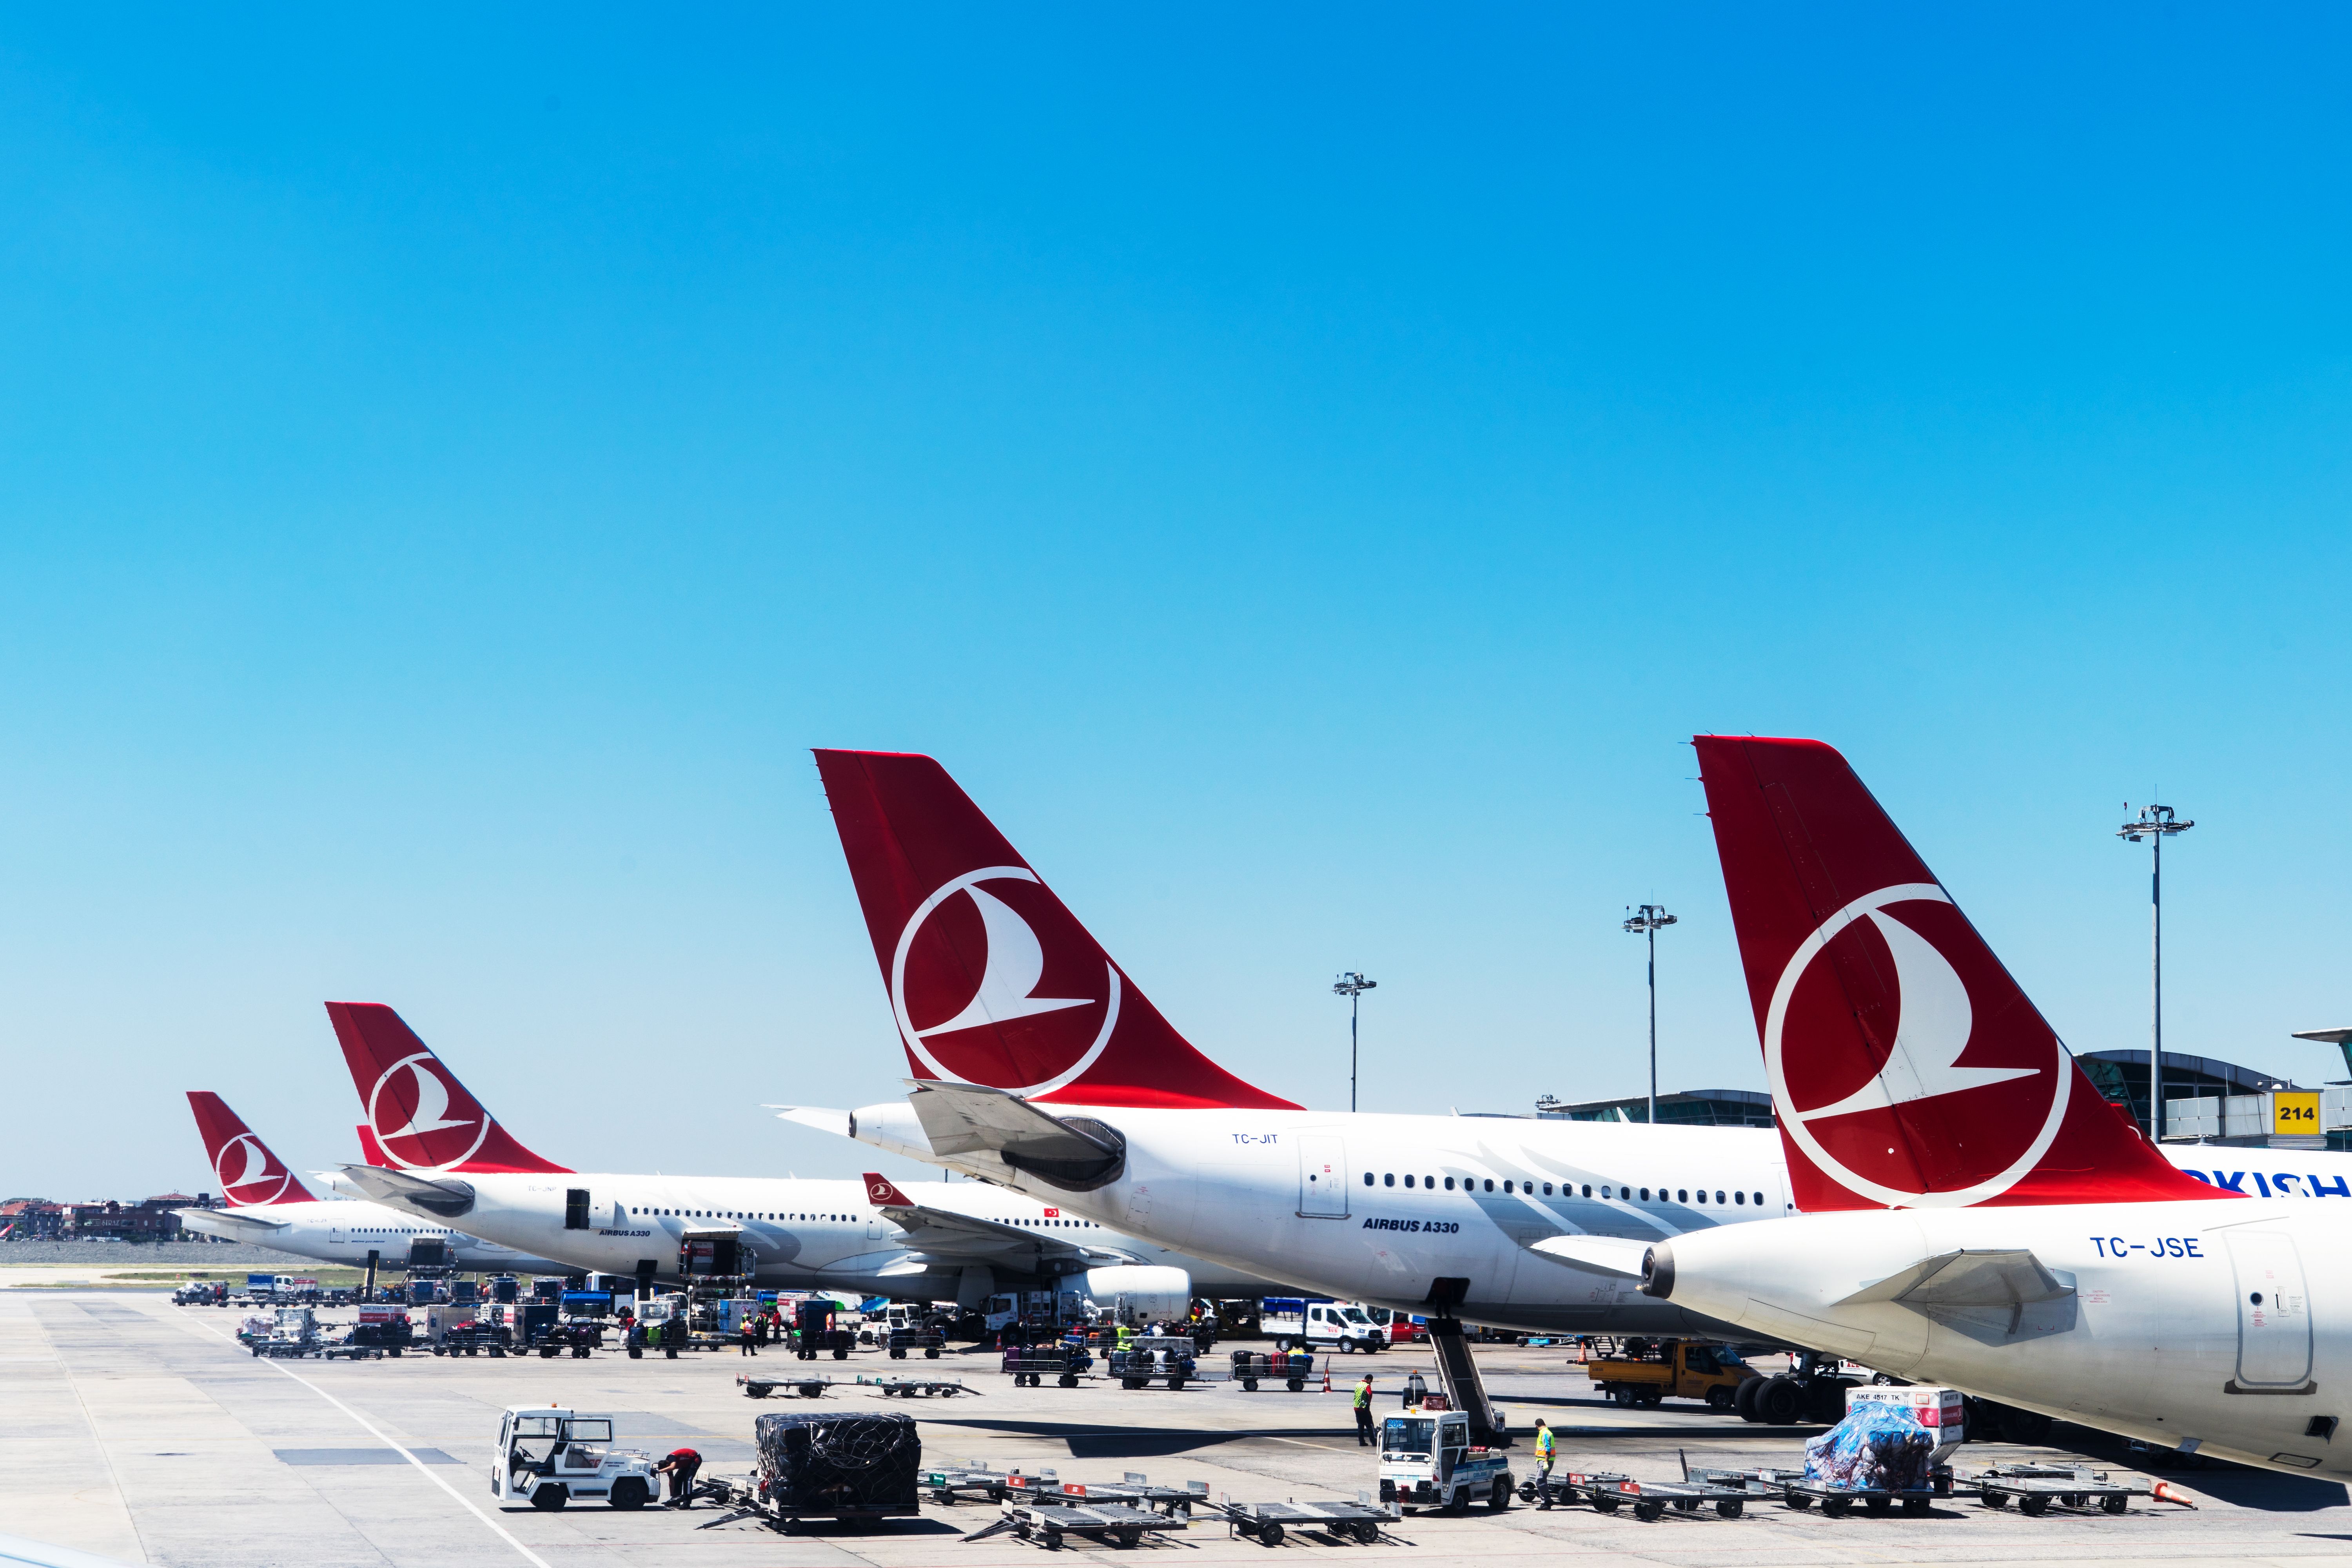 Turkish Airlines aircraft parked at IST airport